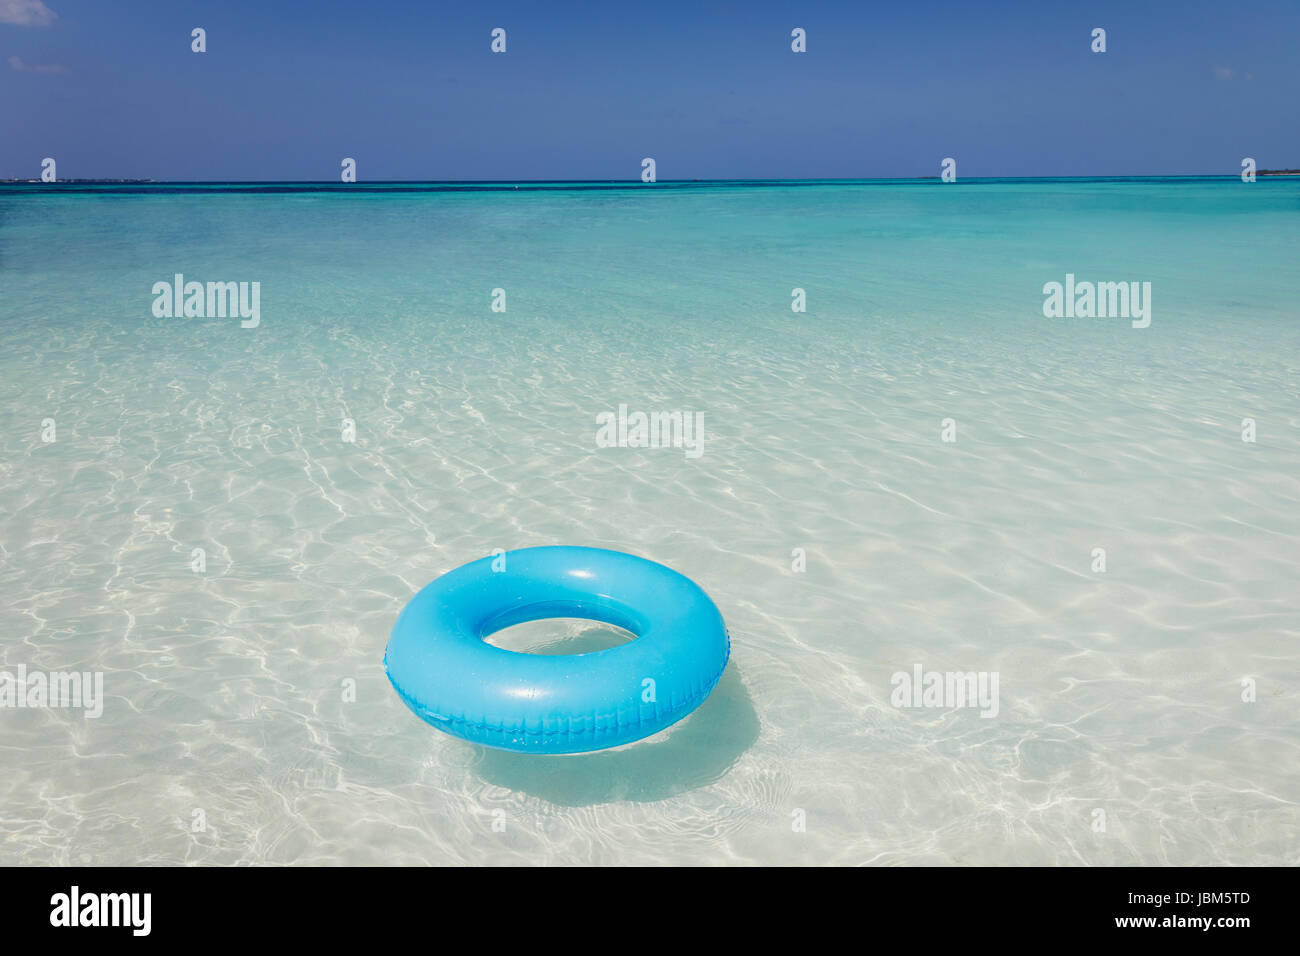 Blue inflatable ring floating in tropical ocean Stock Photo